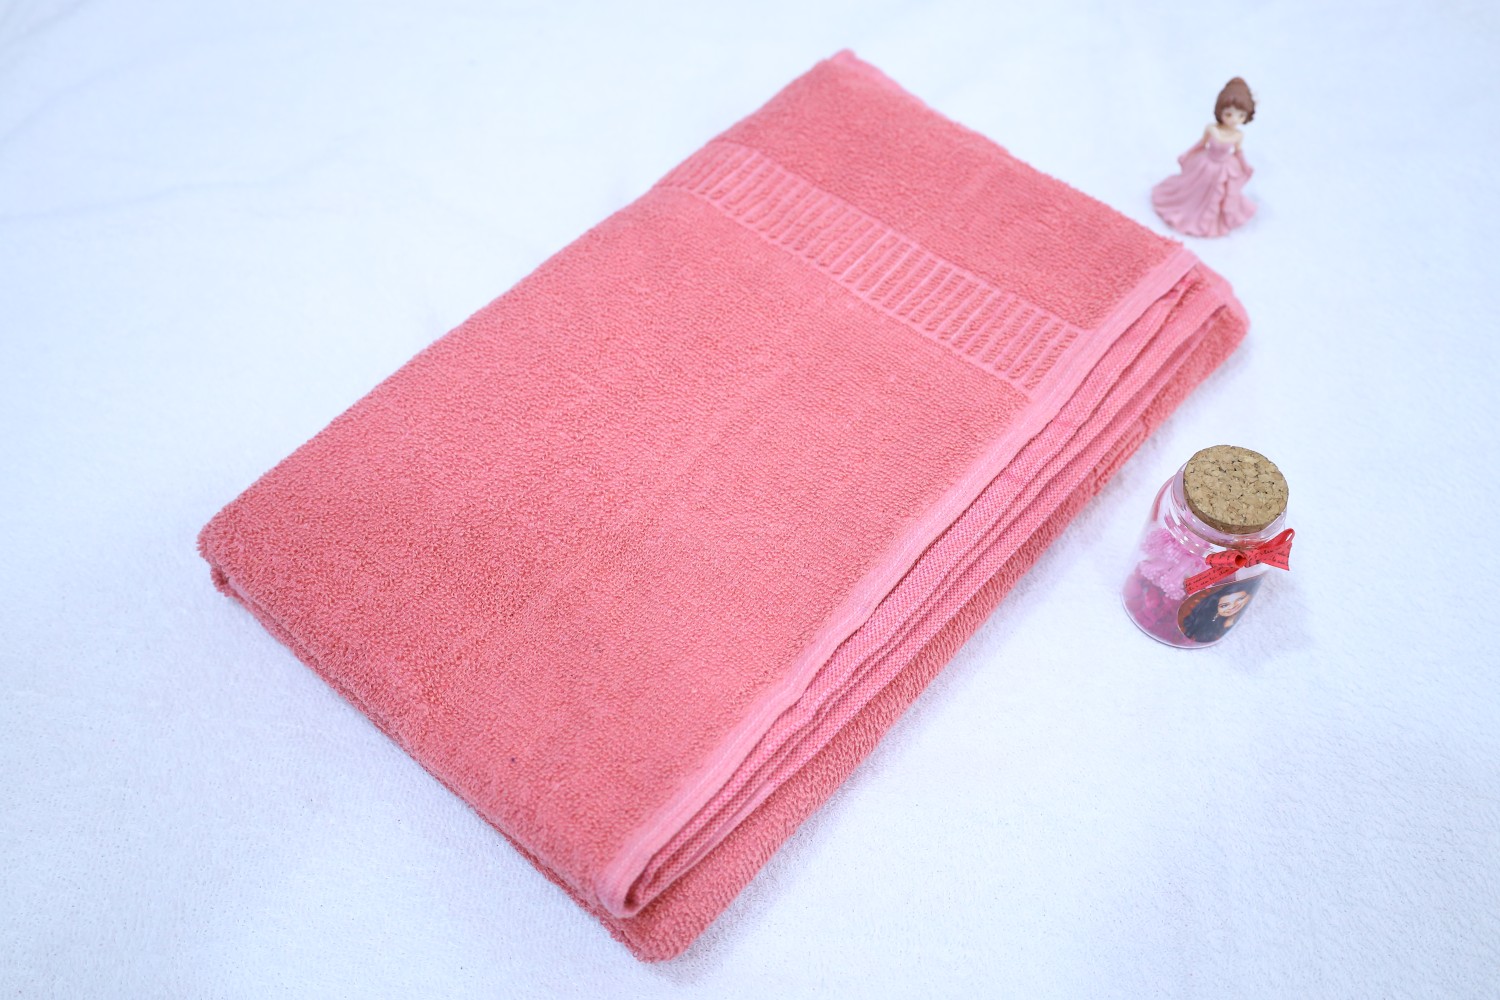 Taurusent Super Soft 100% Cotton High Absorbing Turkey Bath Towel, Size: 30x60 inches (450 GSM) - Pack of 1(PINK)